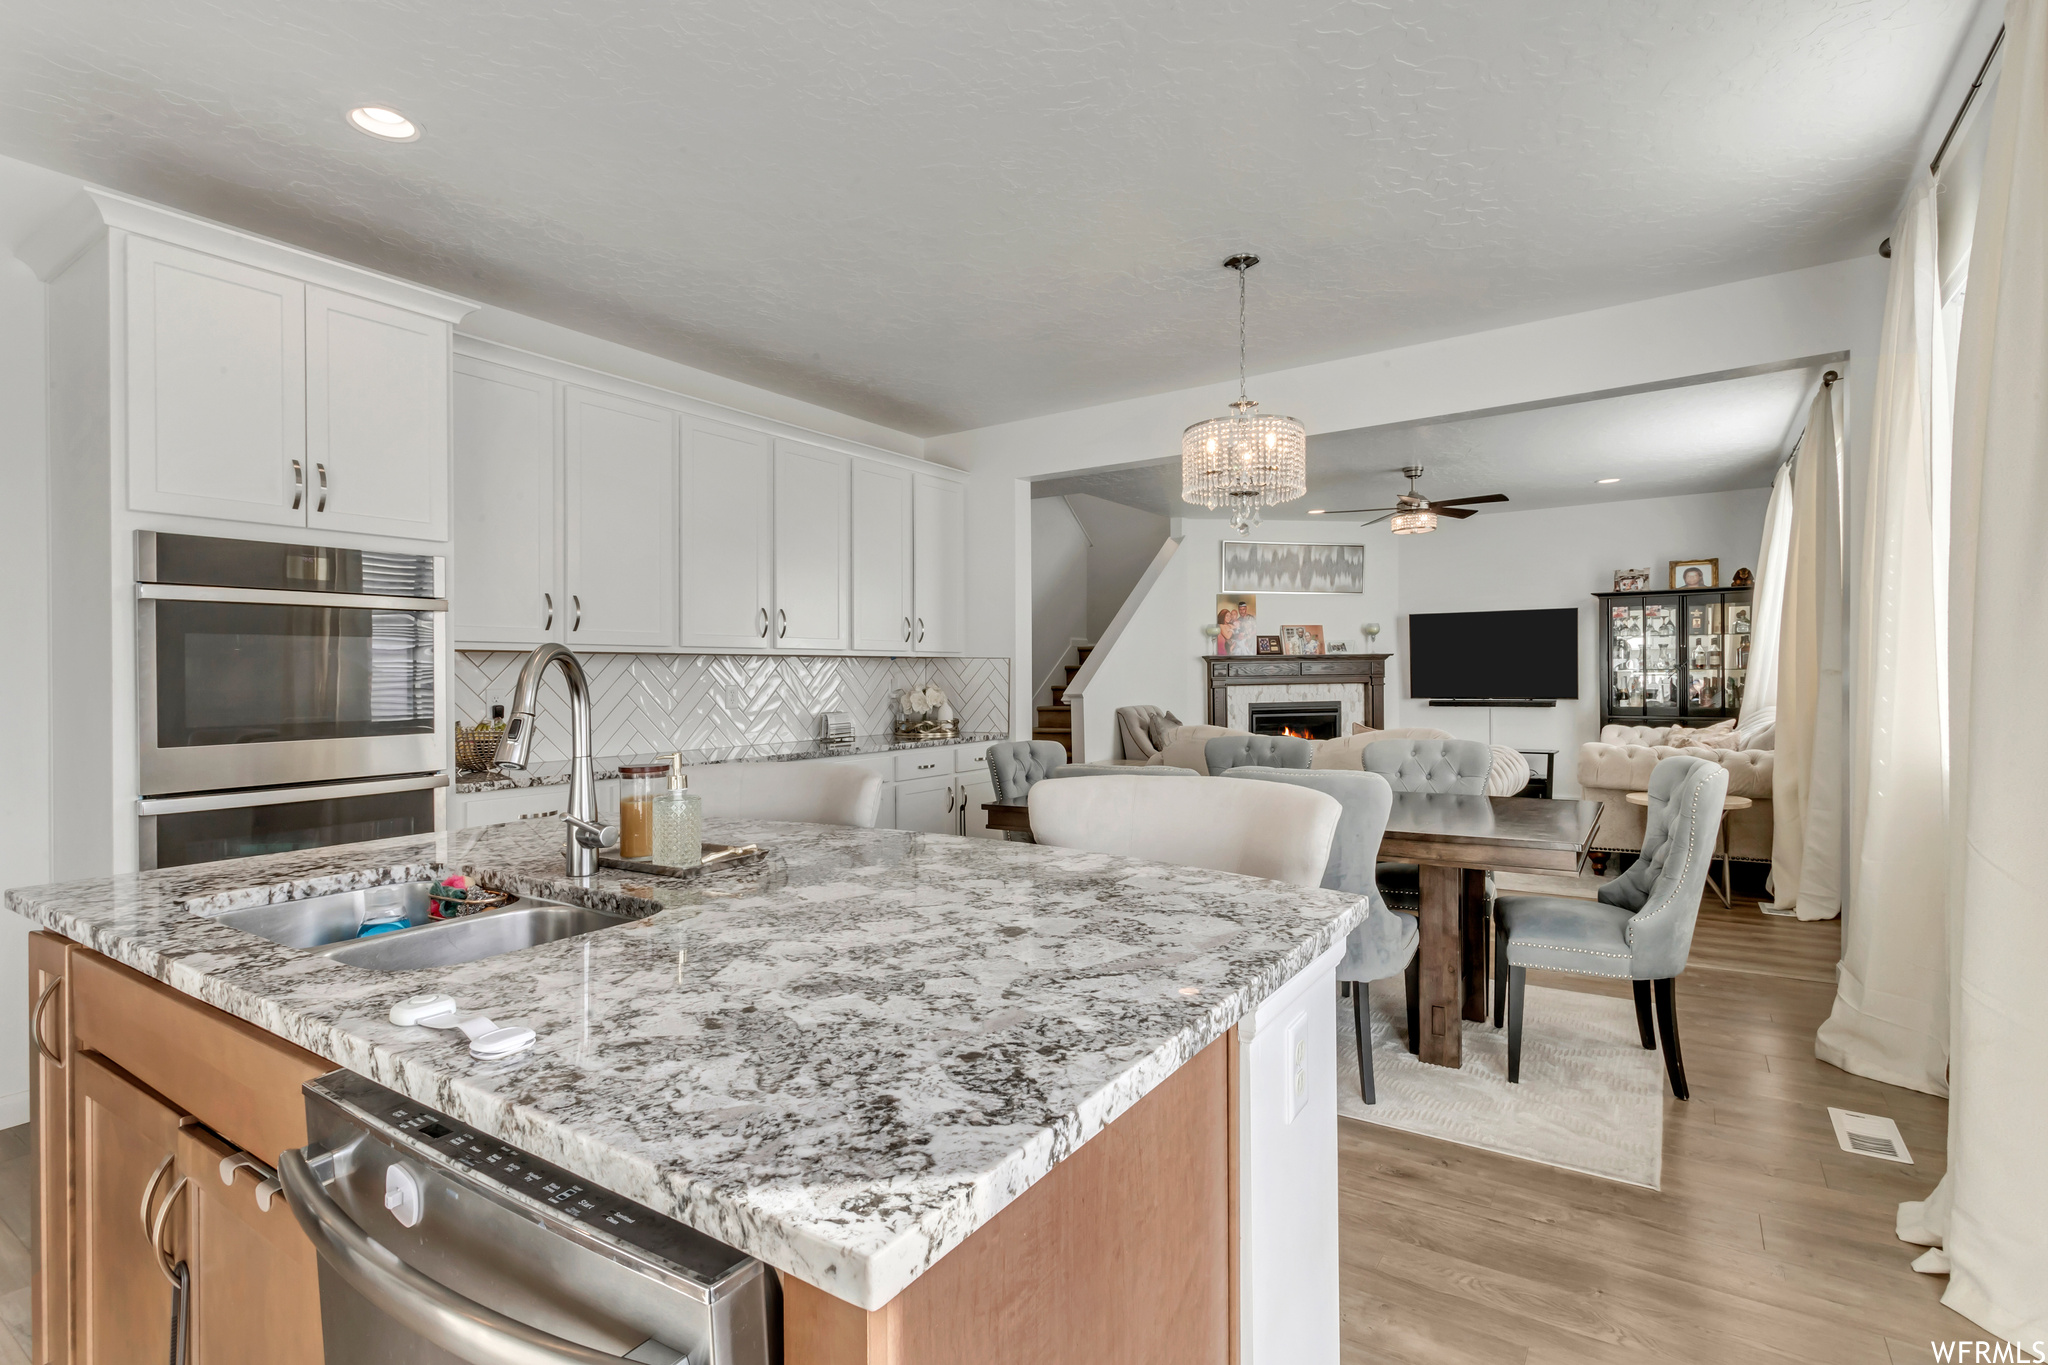 Kitchen with a center island with sink, appliances with stainless steel finishes, tasteful backsplash, light wood-type flooring, and white cabinetry